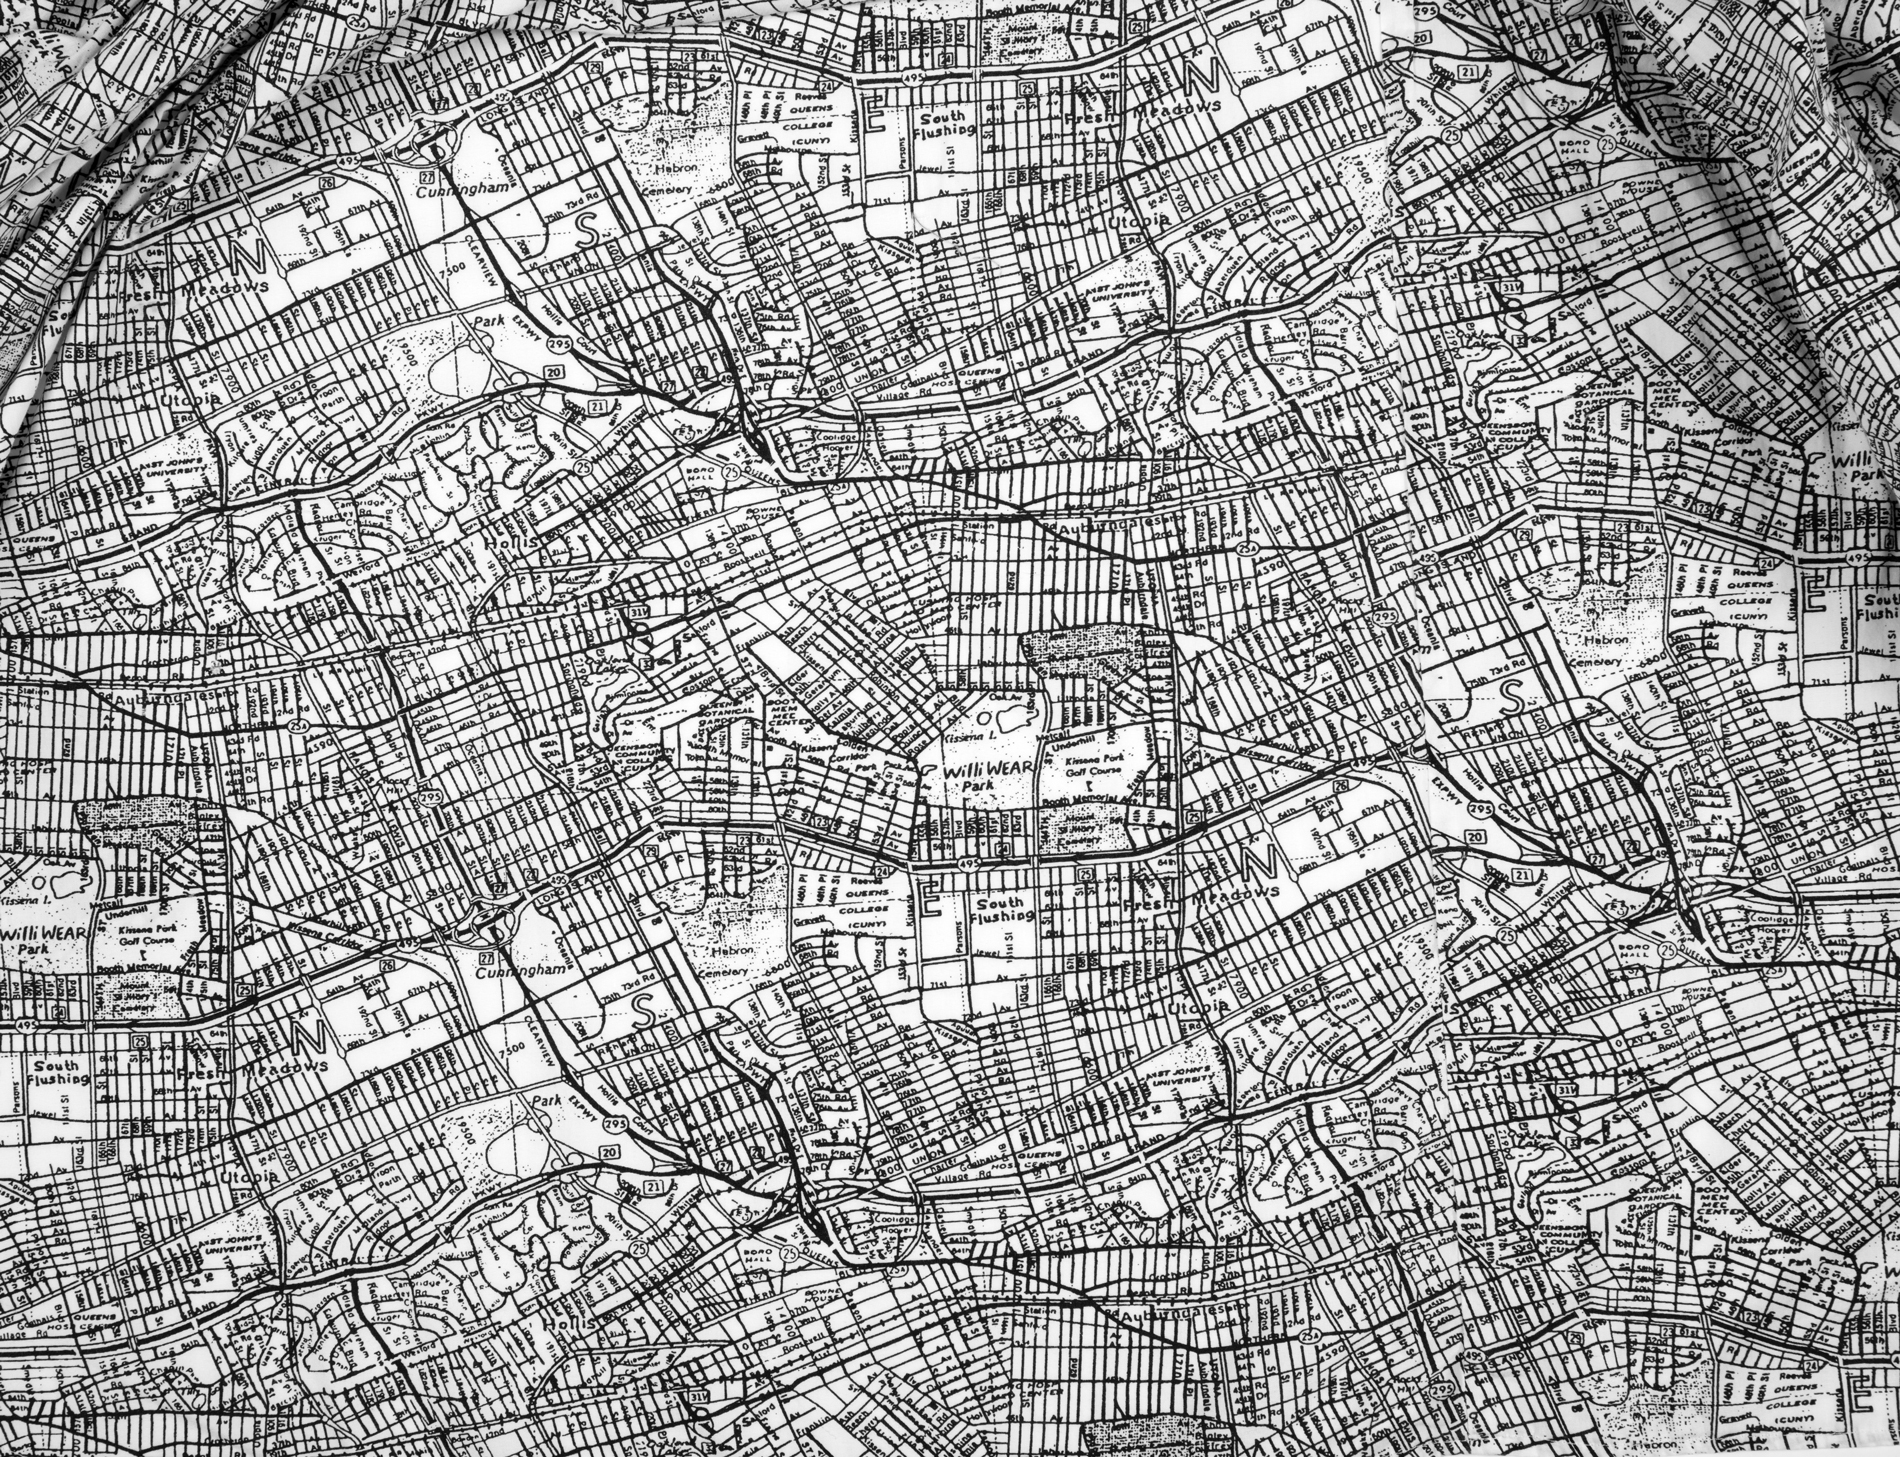 Black and white map of a city with lots of roads